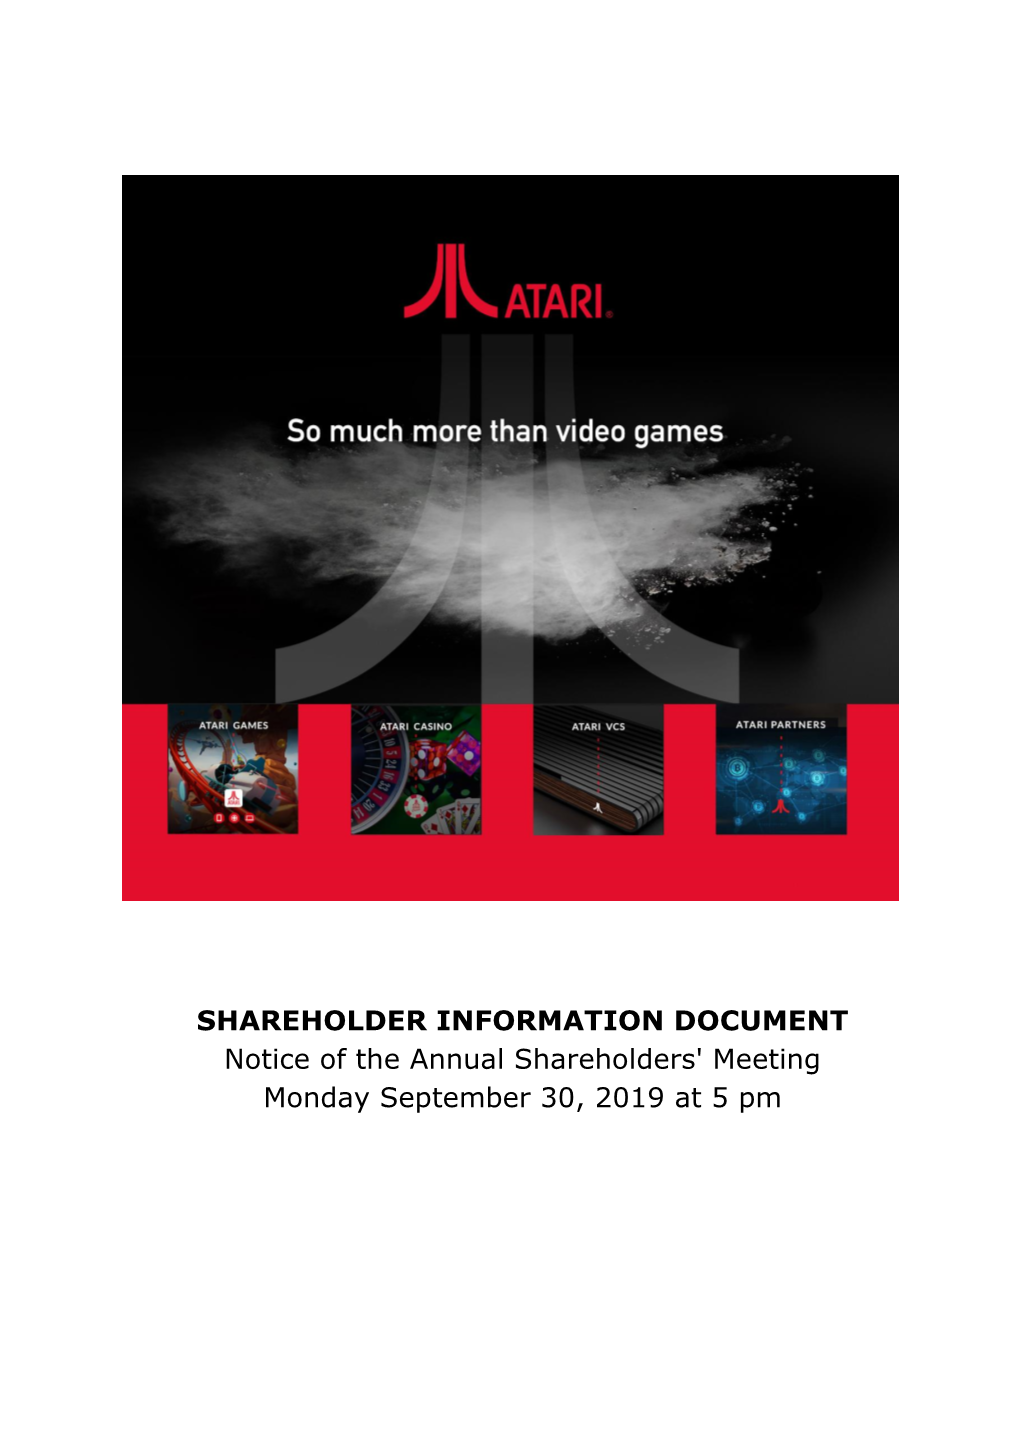 SHAREHOLDER INFORMATION DOCUMENT Notice of the Annual Shareholders' Meeting Monday September 30, 2019 at 5 Pm